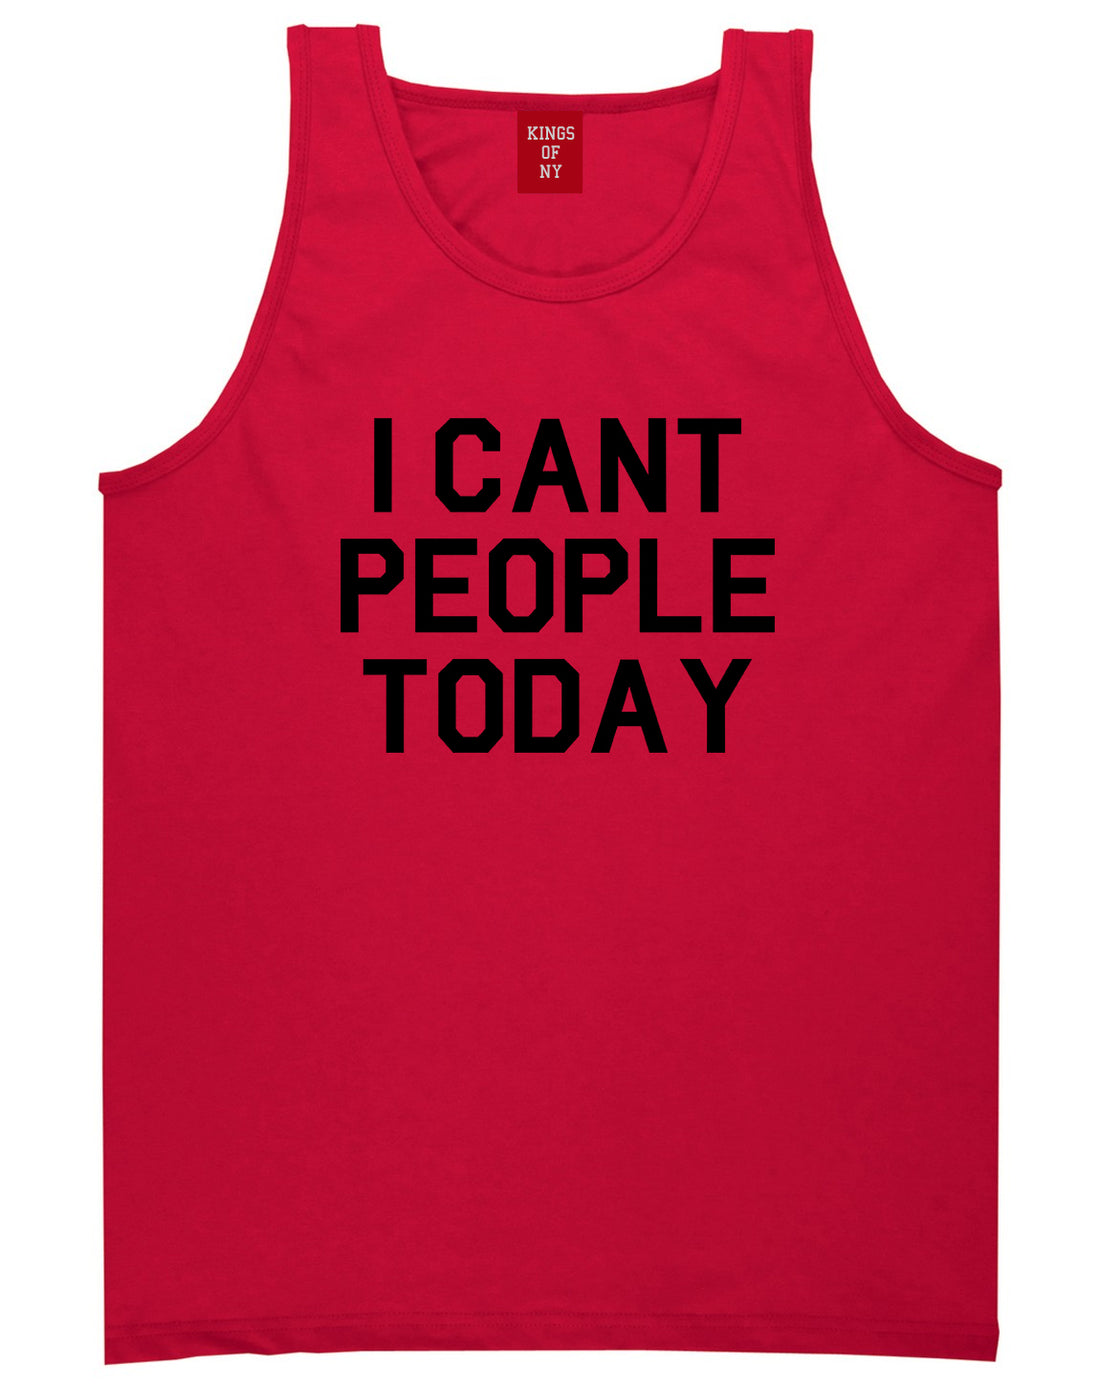 I Cant People Today Funny Mens Tank Top Shirt Red